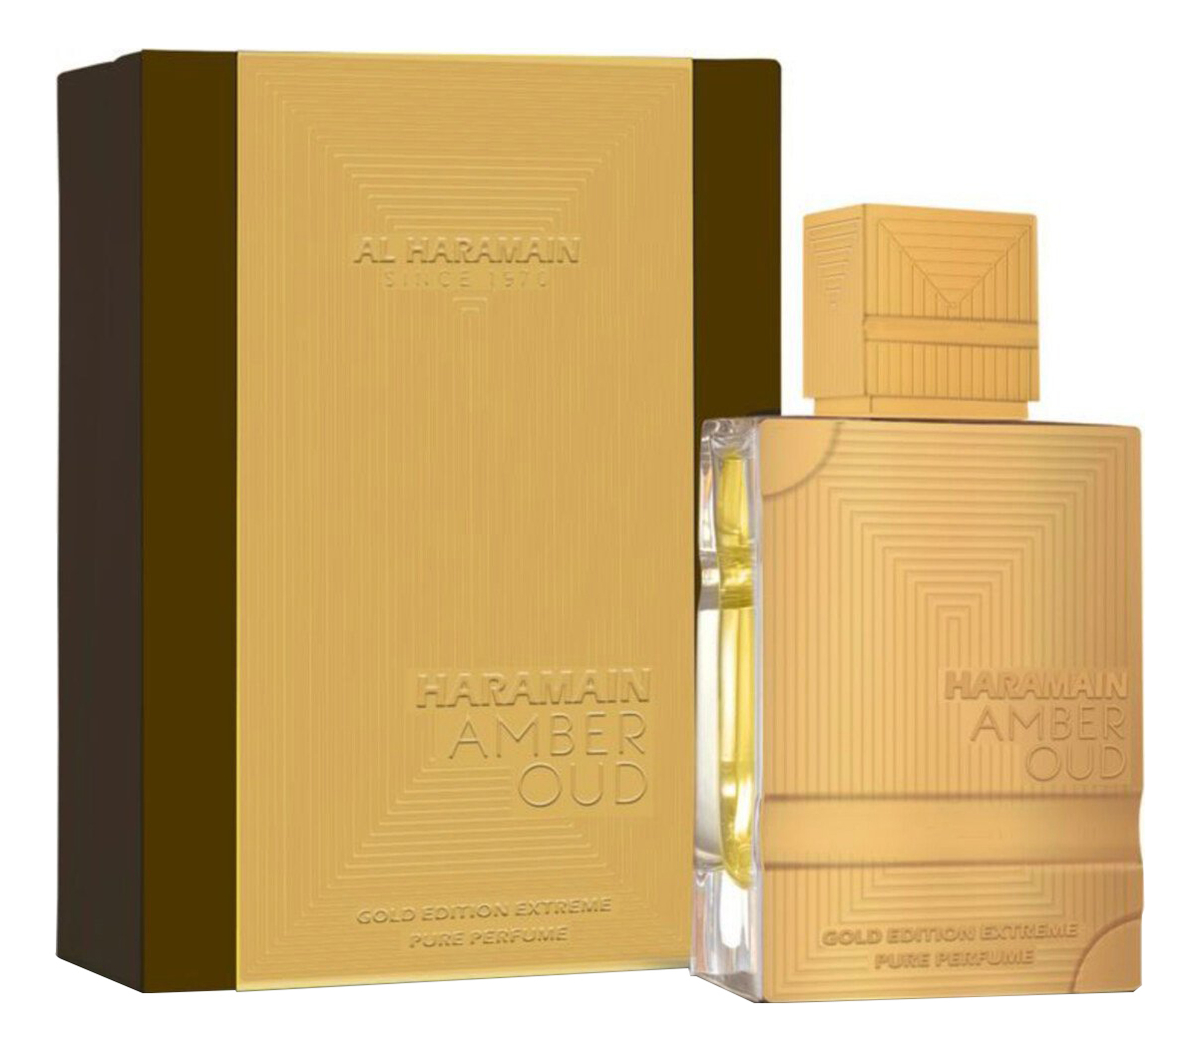 Amber Oud Gold Edition Extreme: парфюмерная вода 100мл amber oud gold edition парфюмерная вода 100мл уценка